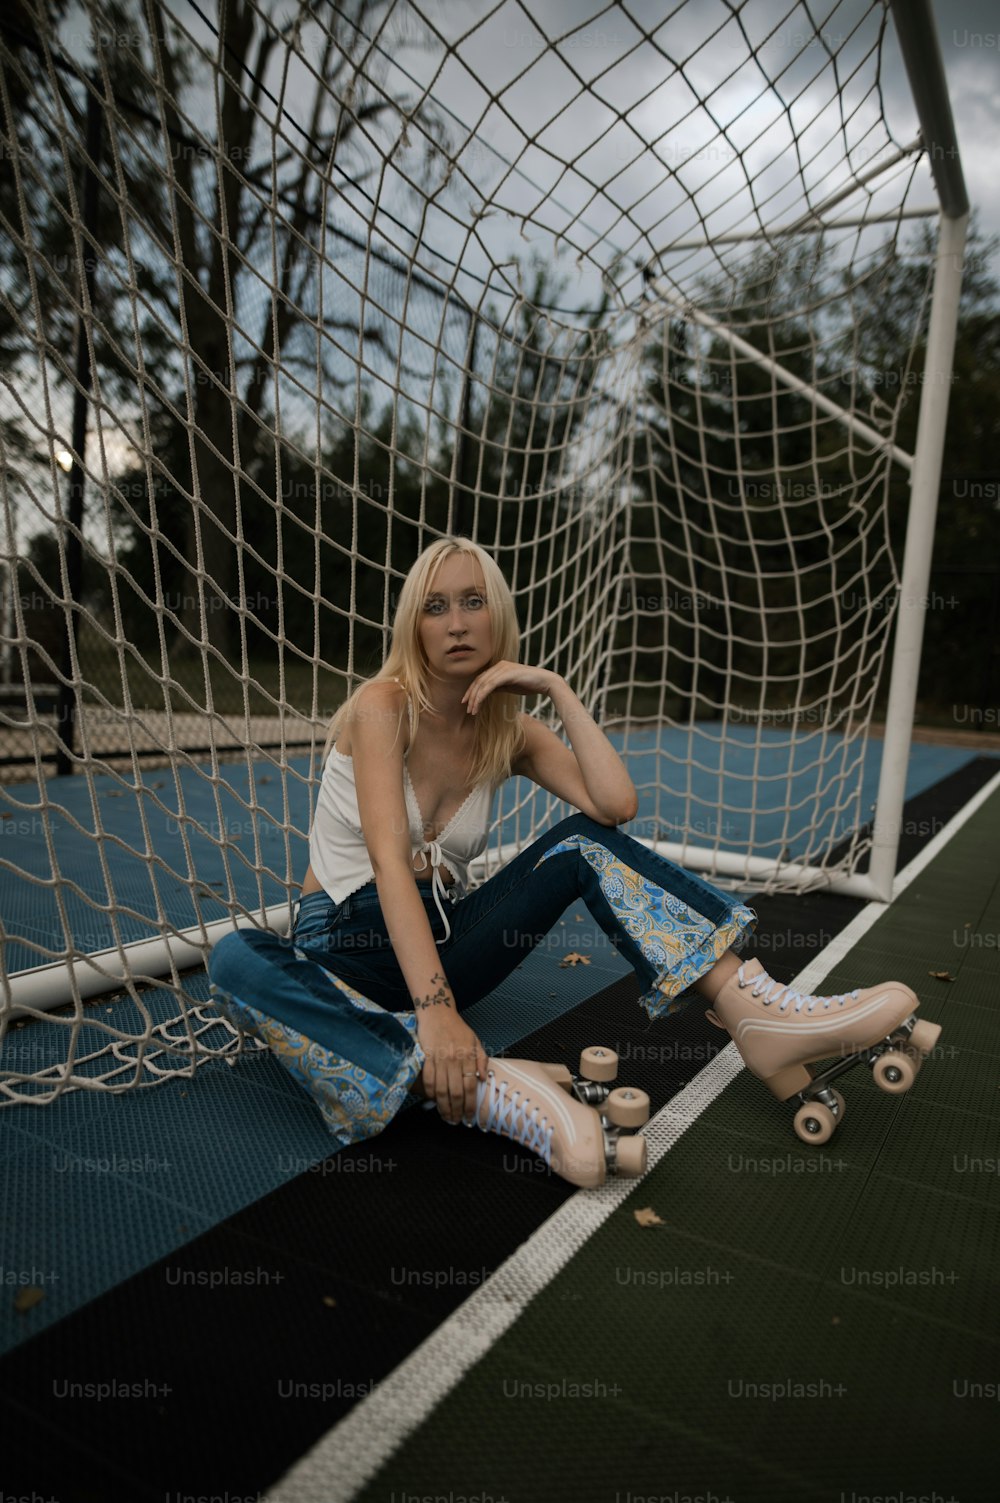 a woman sitting on the ground next to a soccer net